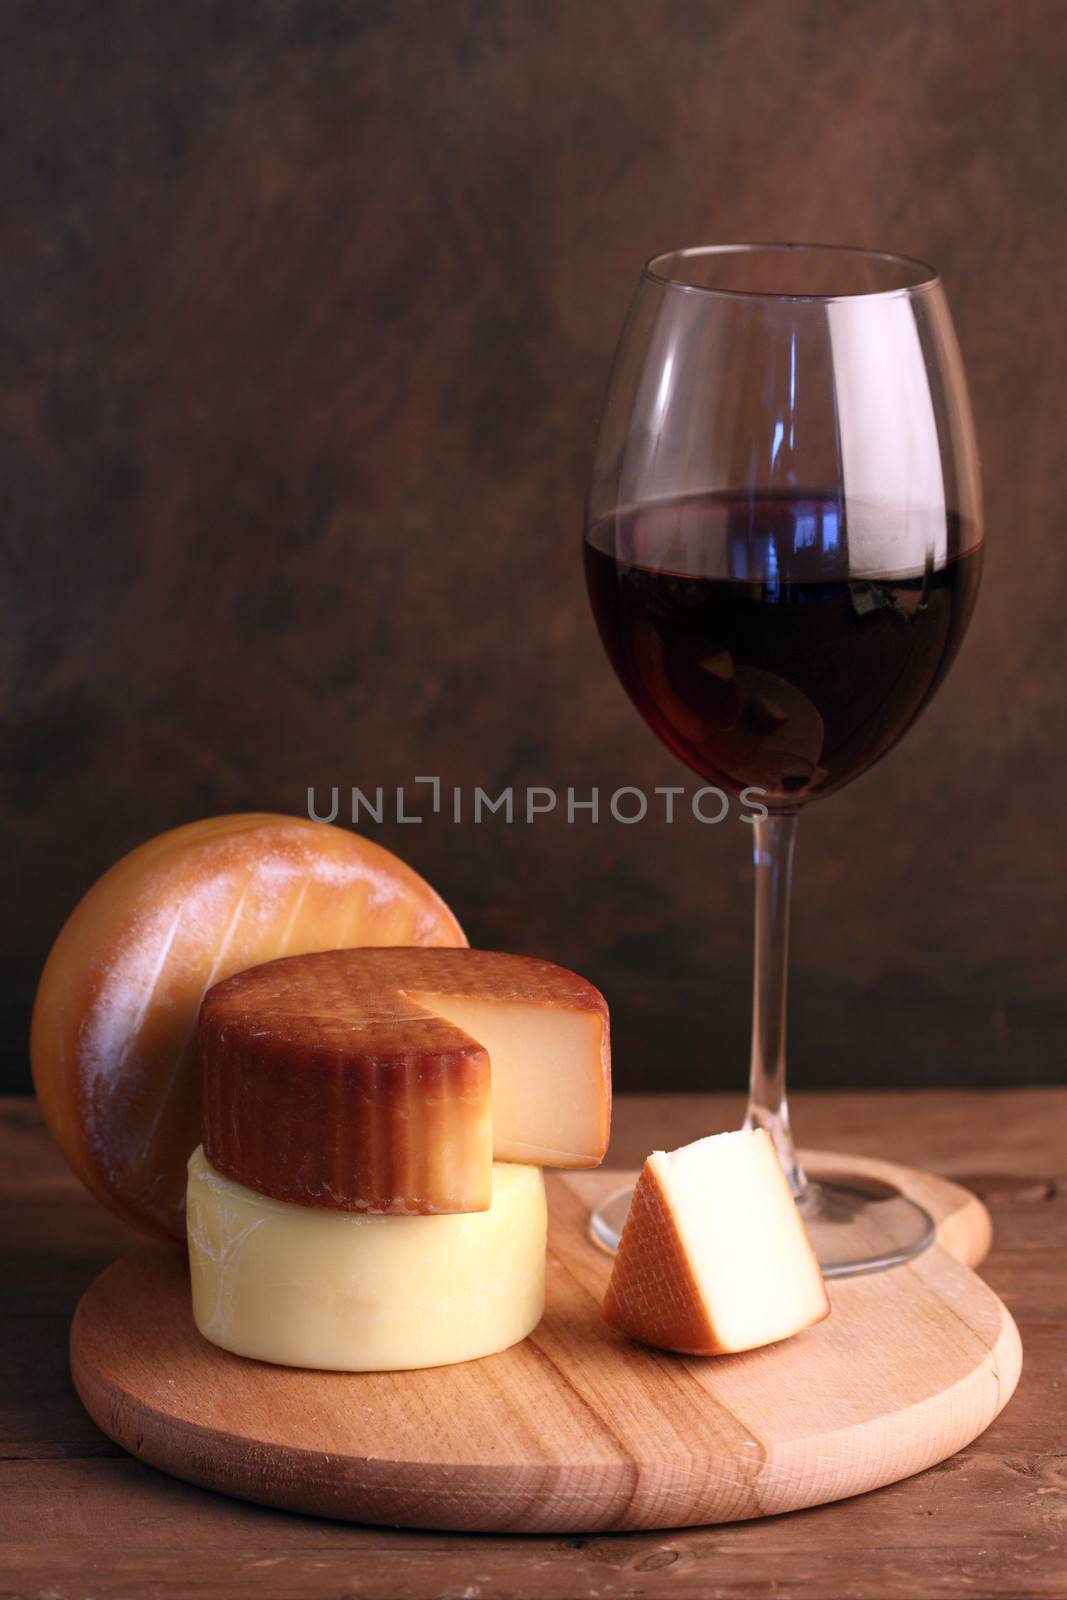 several kinds of cheese and a glass of red wine